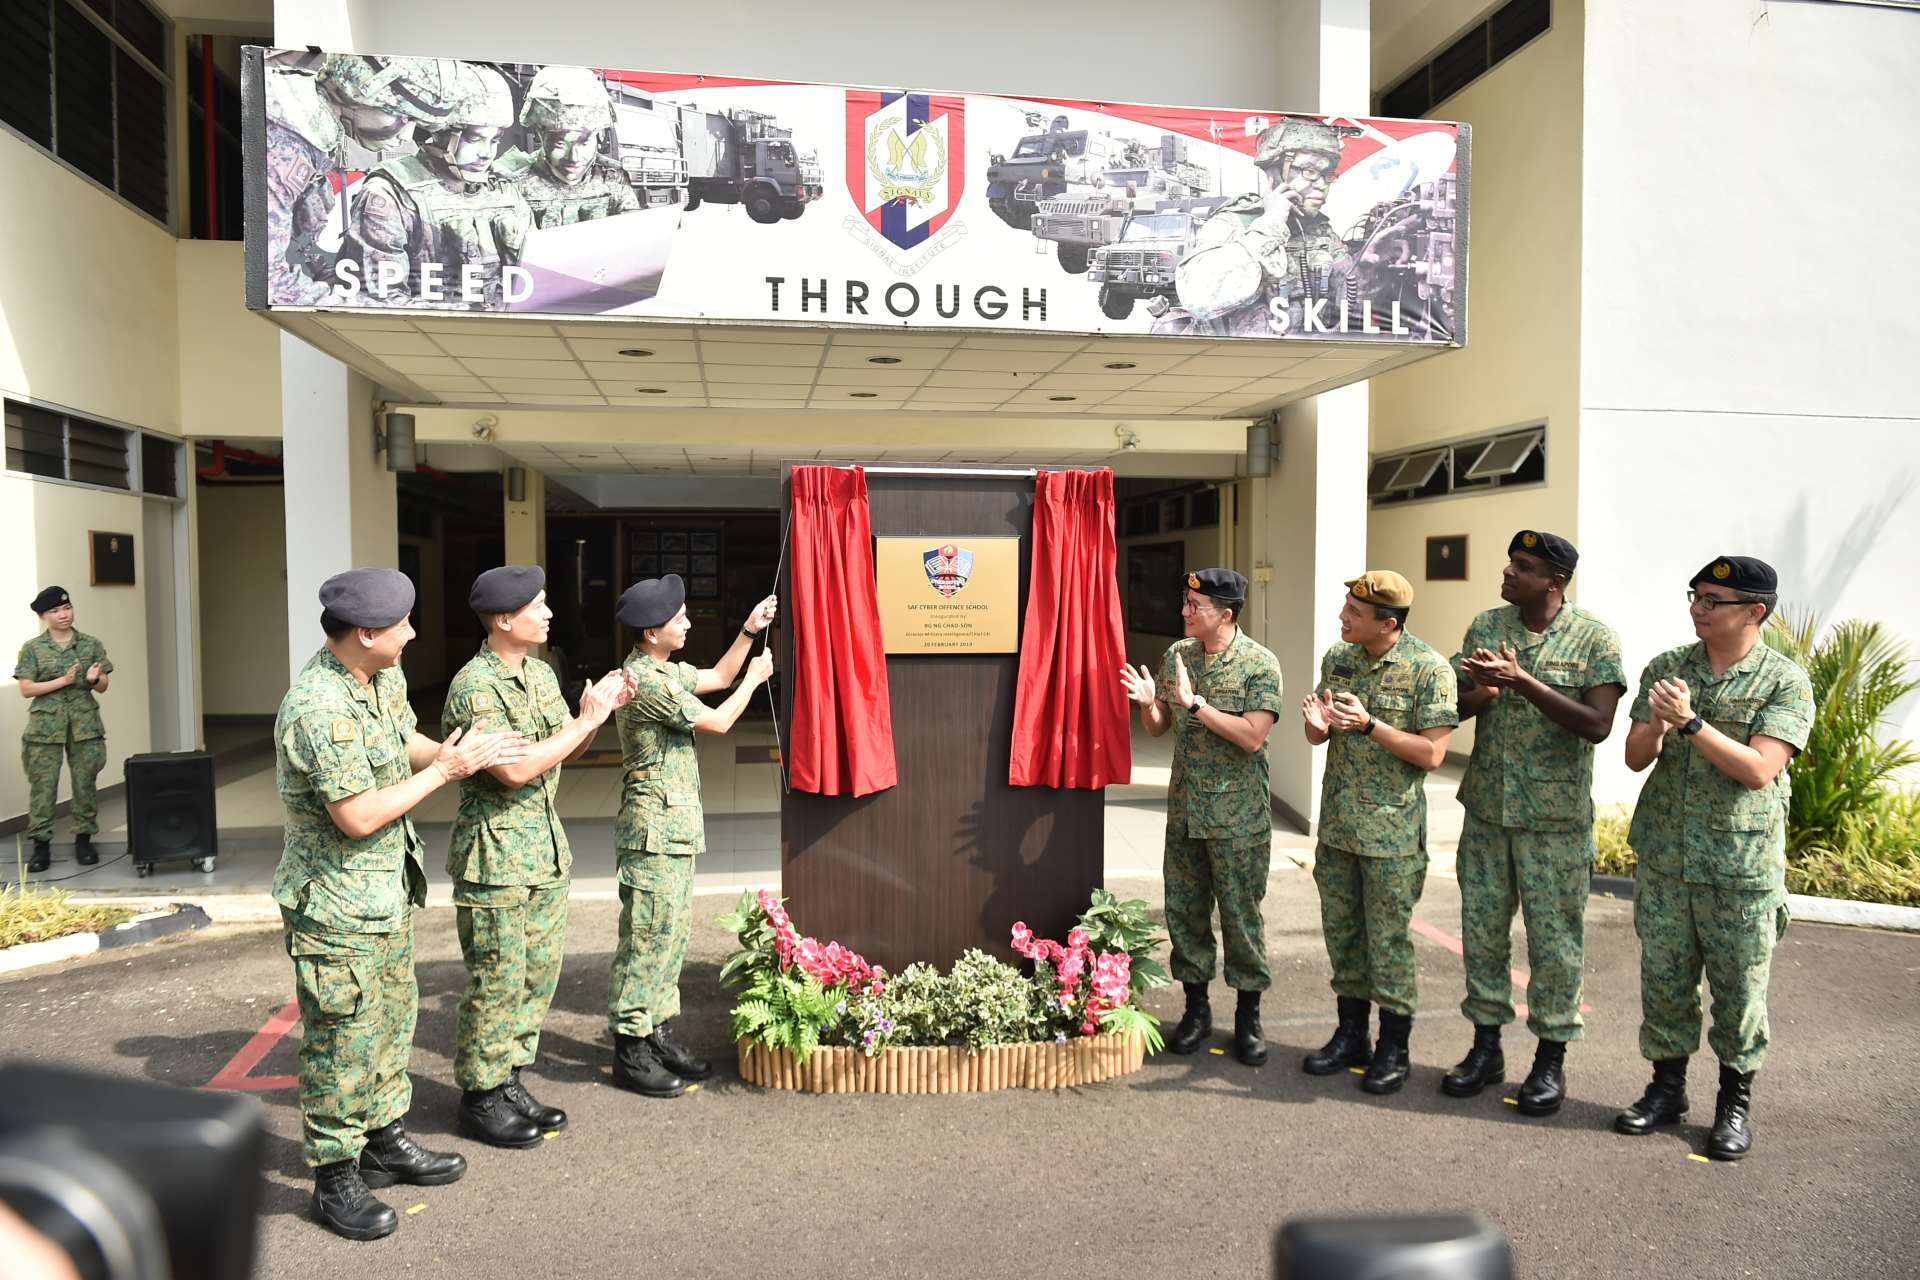 Director Military Intelligence and C4I BG Ng (third from left) opening the Cyber Defence School this morning, accompanied by Commander C4 Command BG Goh (fourth from right) and Director Cyber Policy and Plans Directorate BG Tan (third from right).